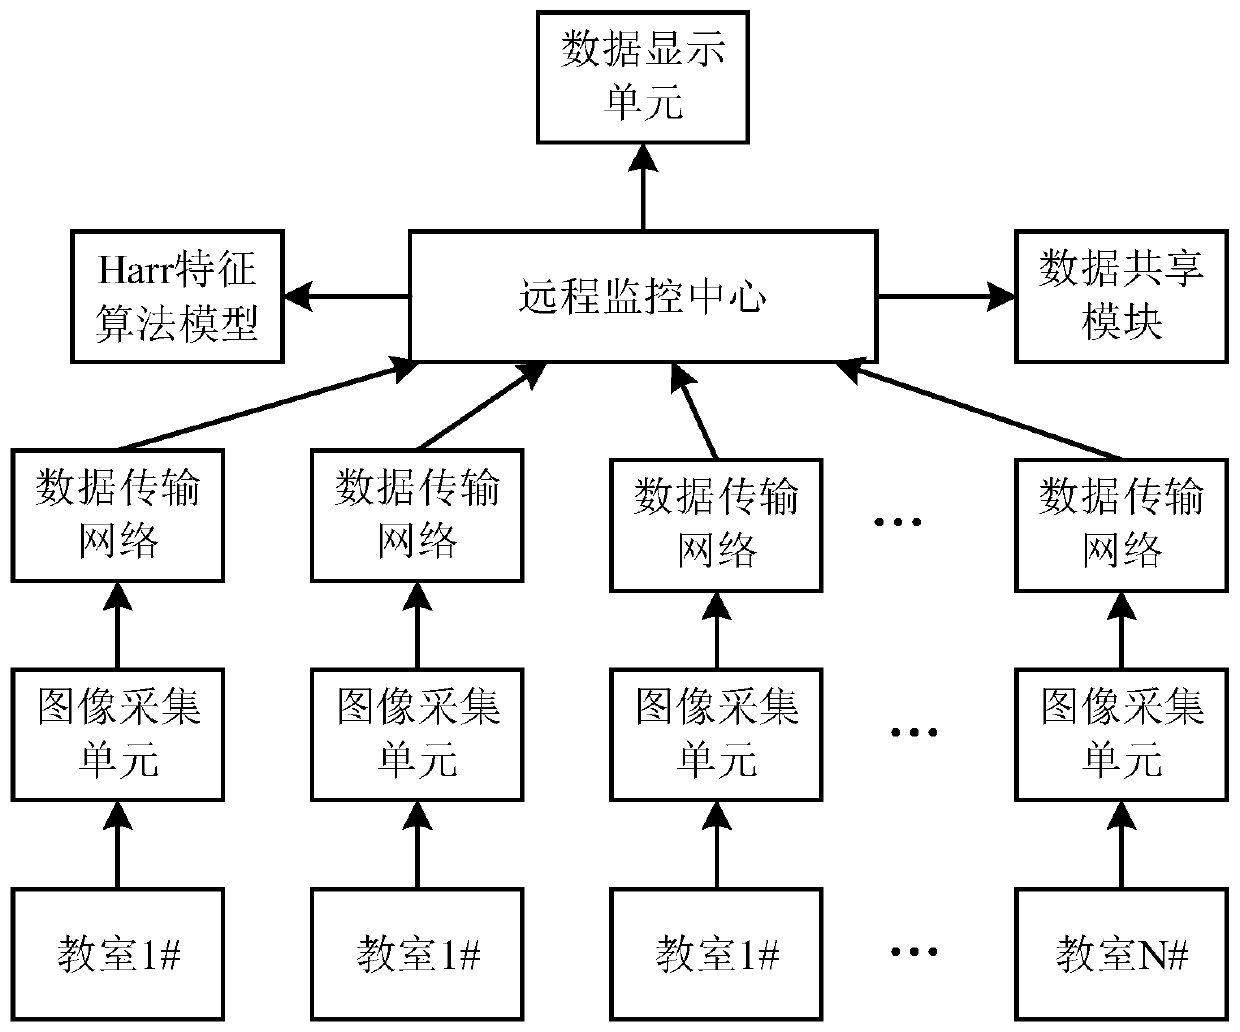 Educational technology teaching system and method of Harr feature big data algorithm